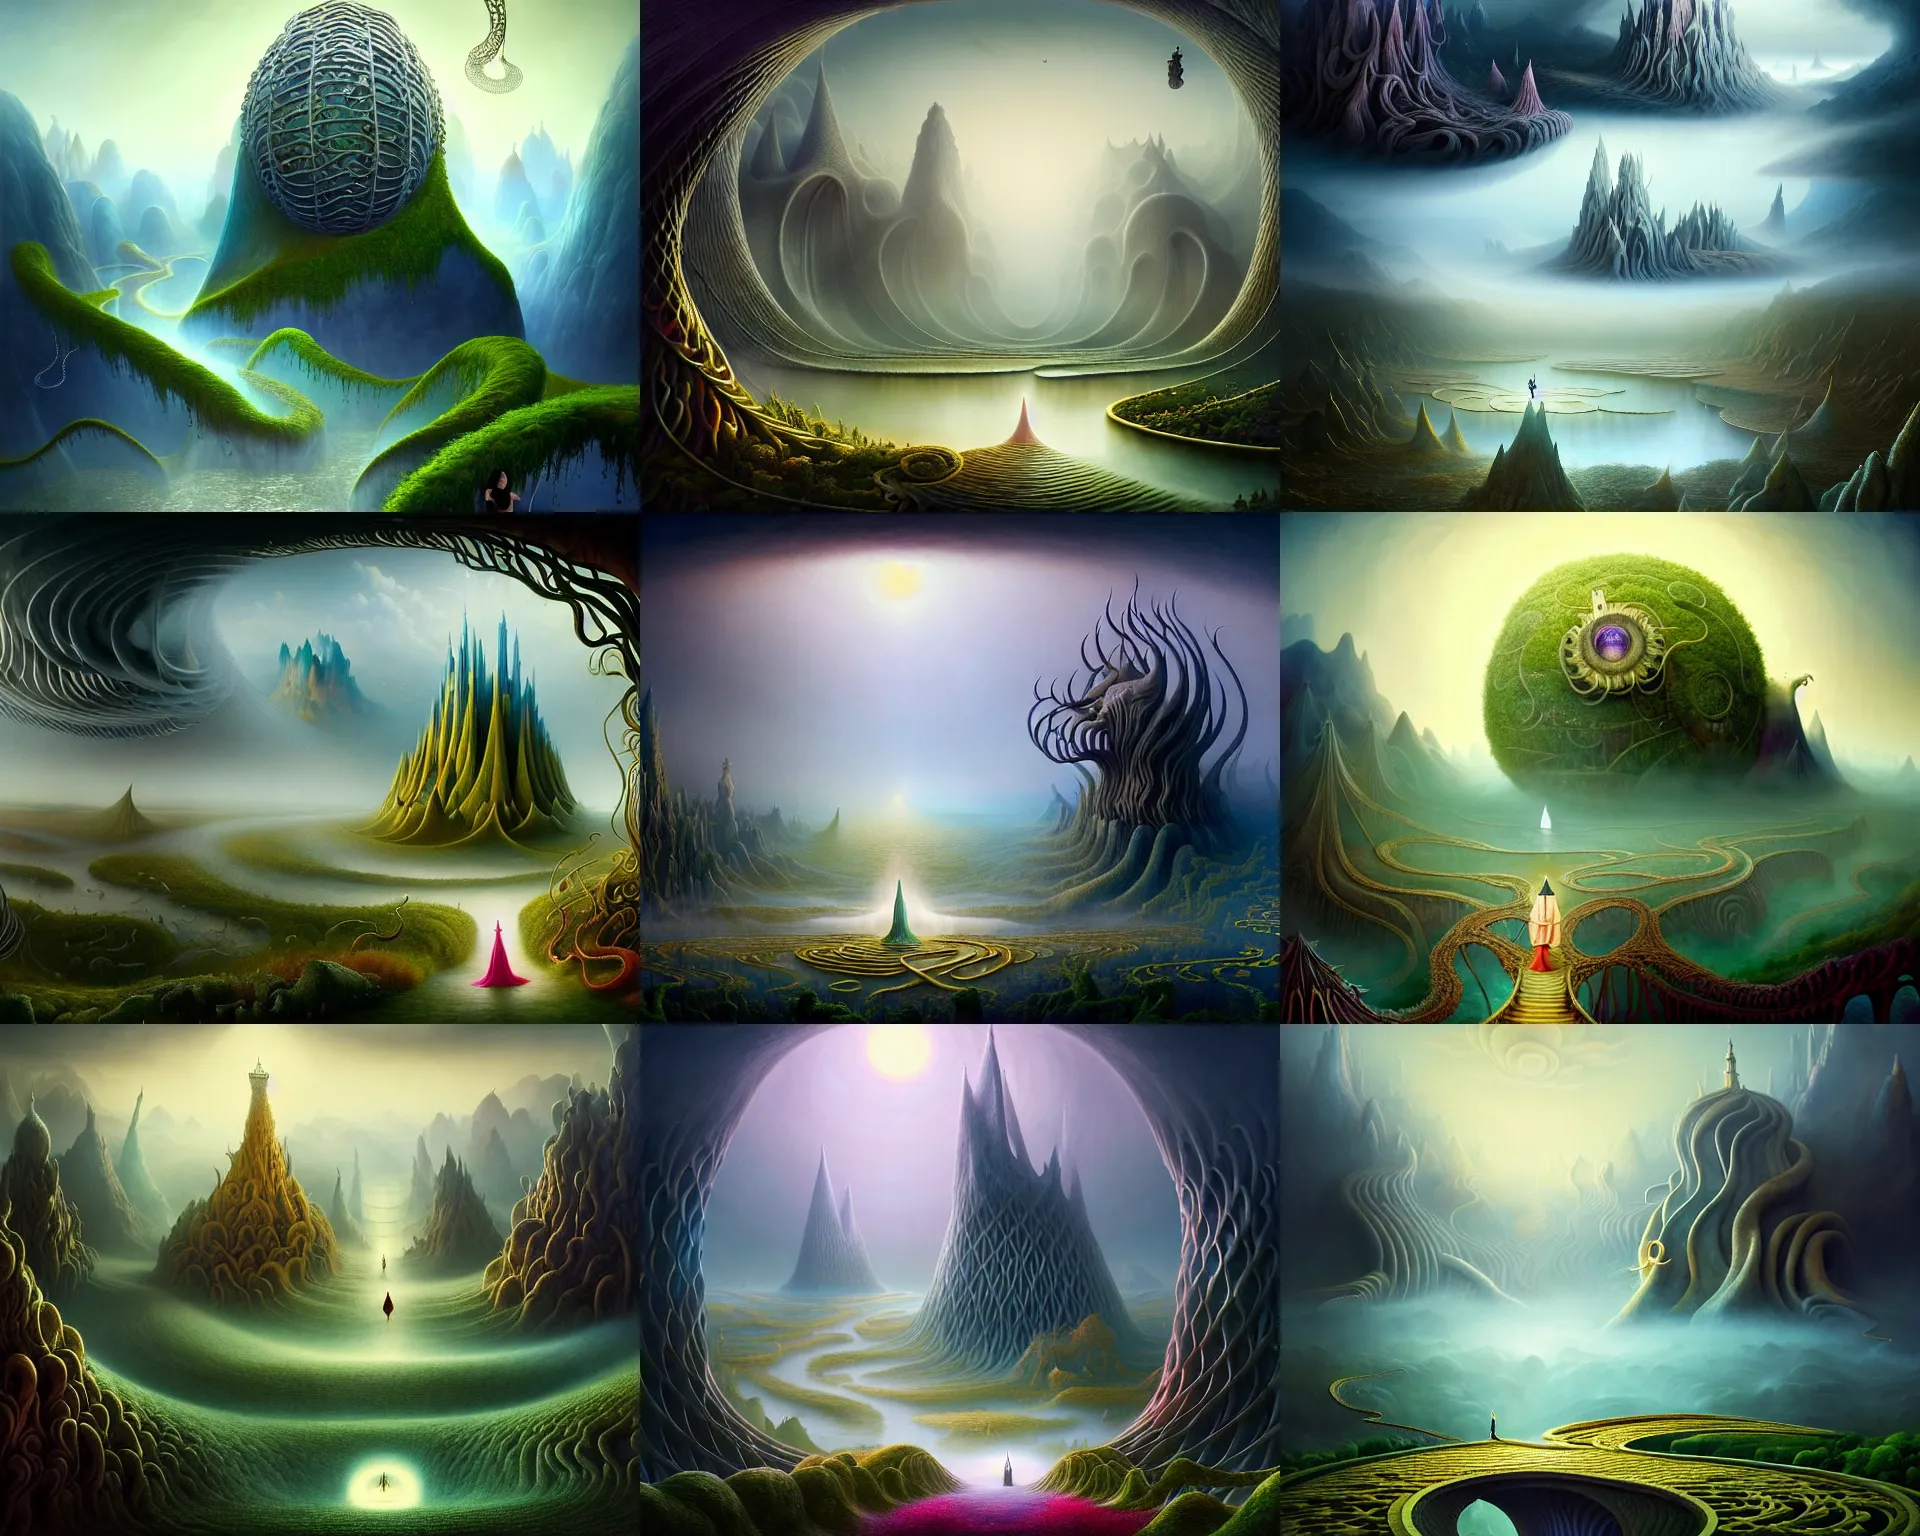 Prompt: a beguiling epic stunning beautiful and insanely detailed matte painting of the impossible winding path through the land of the spirits beyond the veil with surreal architecture designed by Heironymous Bosch, mega structures inspired by Heironymous Bosch's Garden of Earthly Delights, vast surreal landscape and horizon by Asher Durand and Cyril Rolando and Natalie Shau, masterpiece!!!, grand!, imaginative!!!, whimsical!!, epic scale, intricate details, sense of awe, elite, wonder, insanely complex, masterful composition!!!, sharp focus, fantasy realism, dramatic lighting